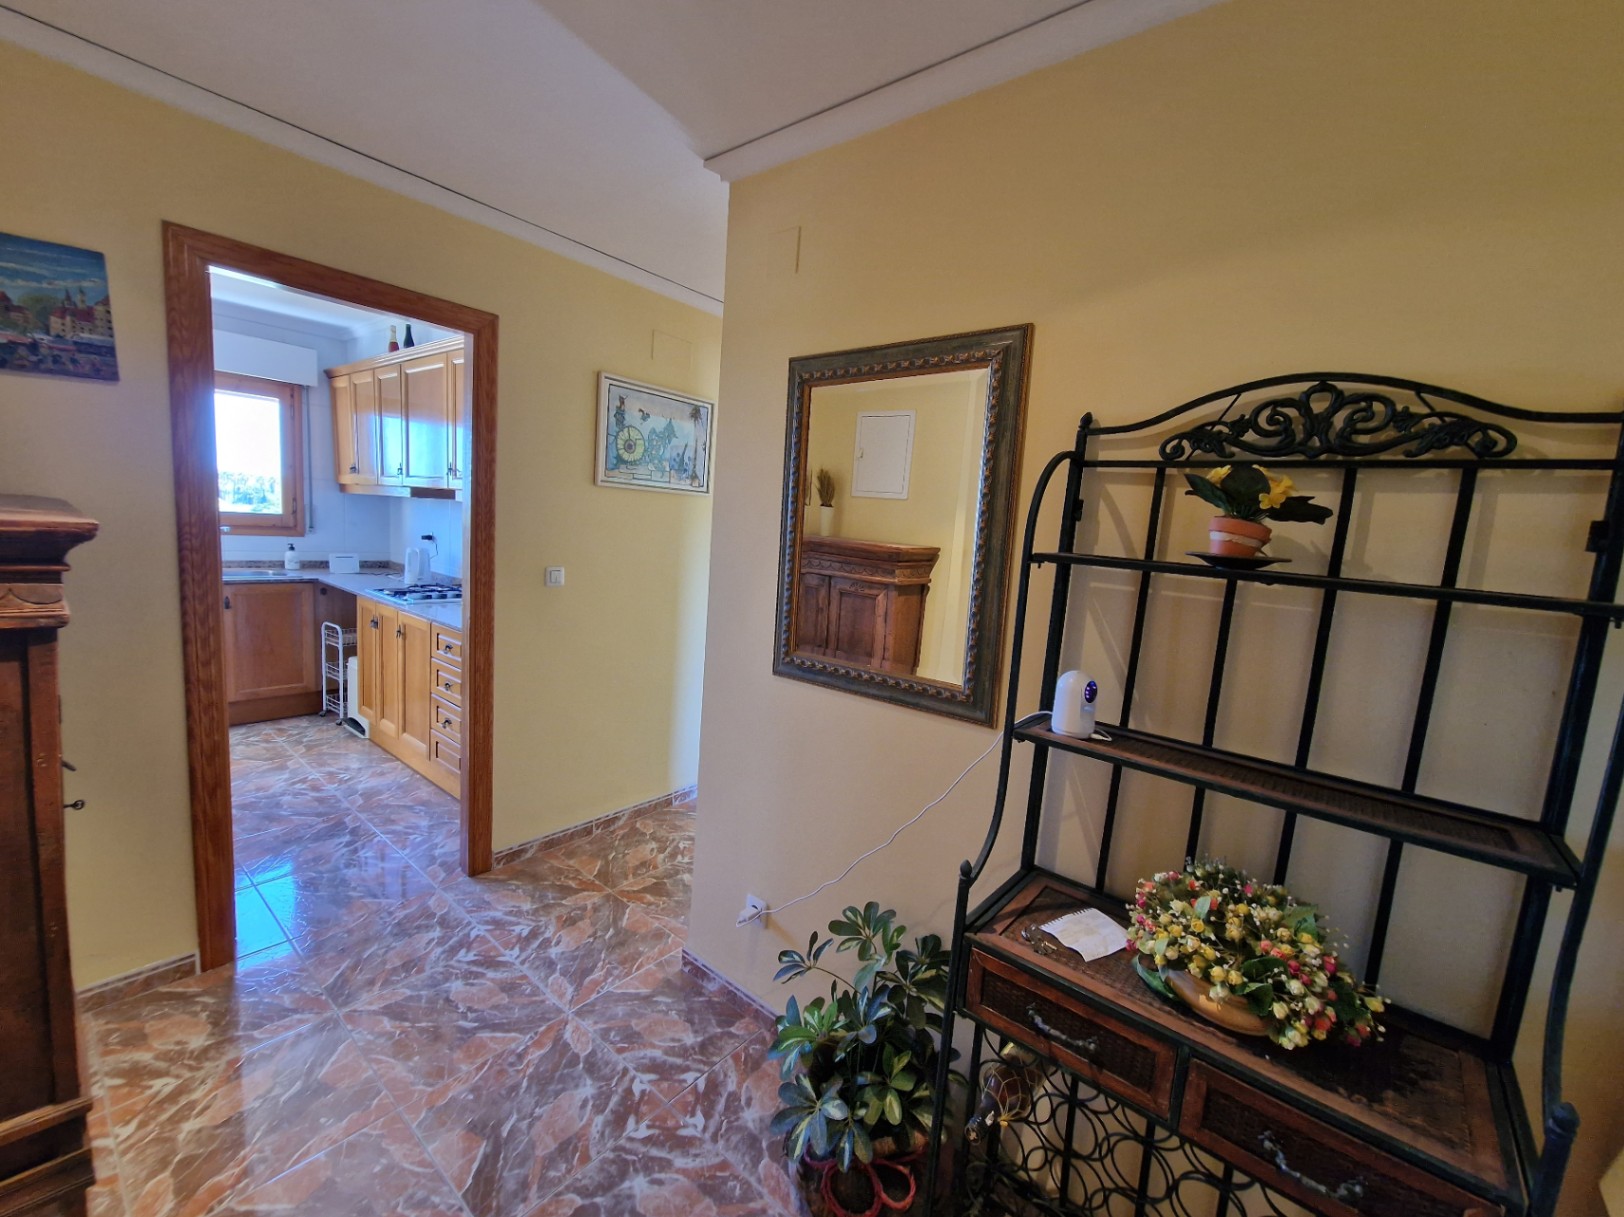 Apartment for rent in Dénia near hospital